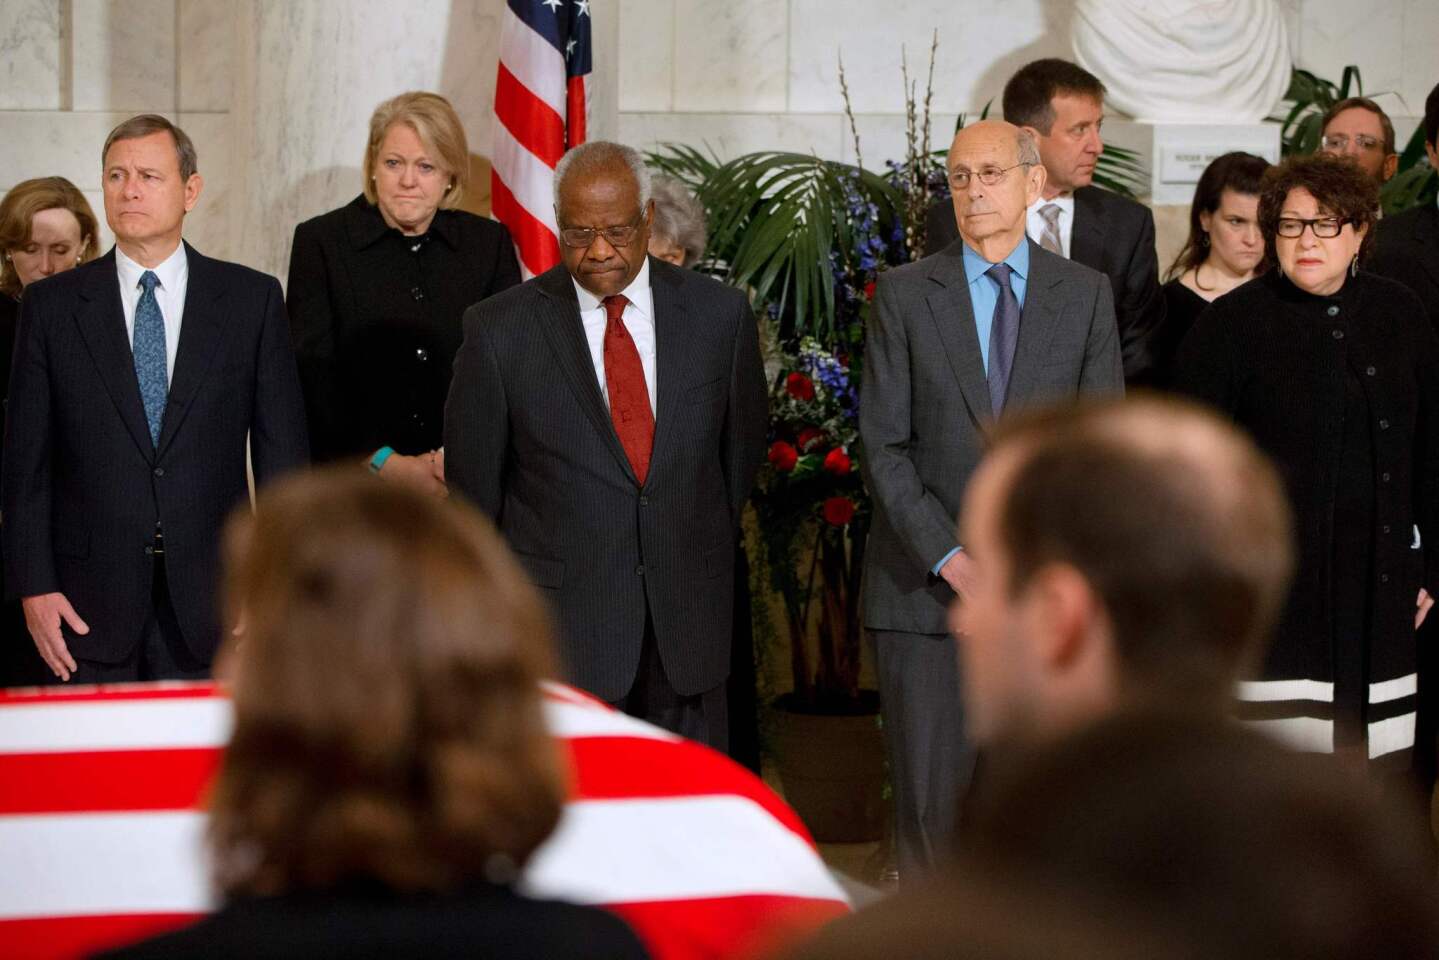 Ferom left; Supreme Court Chief Justice John G. Roberts, Jr.,; Ginny Thomas, Justice Clarence Thomas, Justice Stephen G. Breyer, and Justice Sonia Sotomayor attend a private ceremony in the Great Hall of the Supreme Court where late Supreme Court Justice Antonin Scalia lies in repose in Washington, DC.